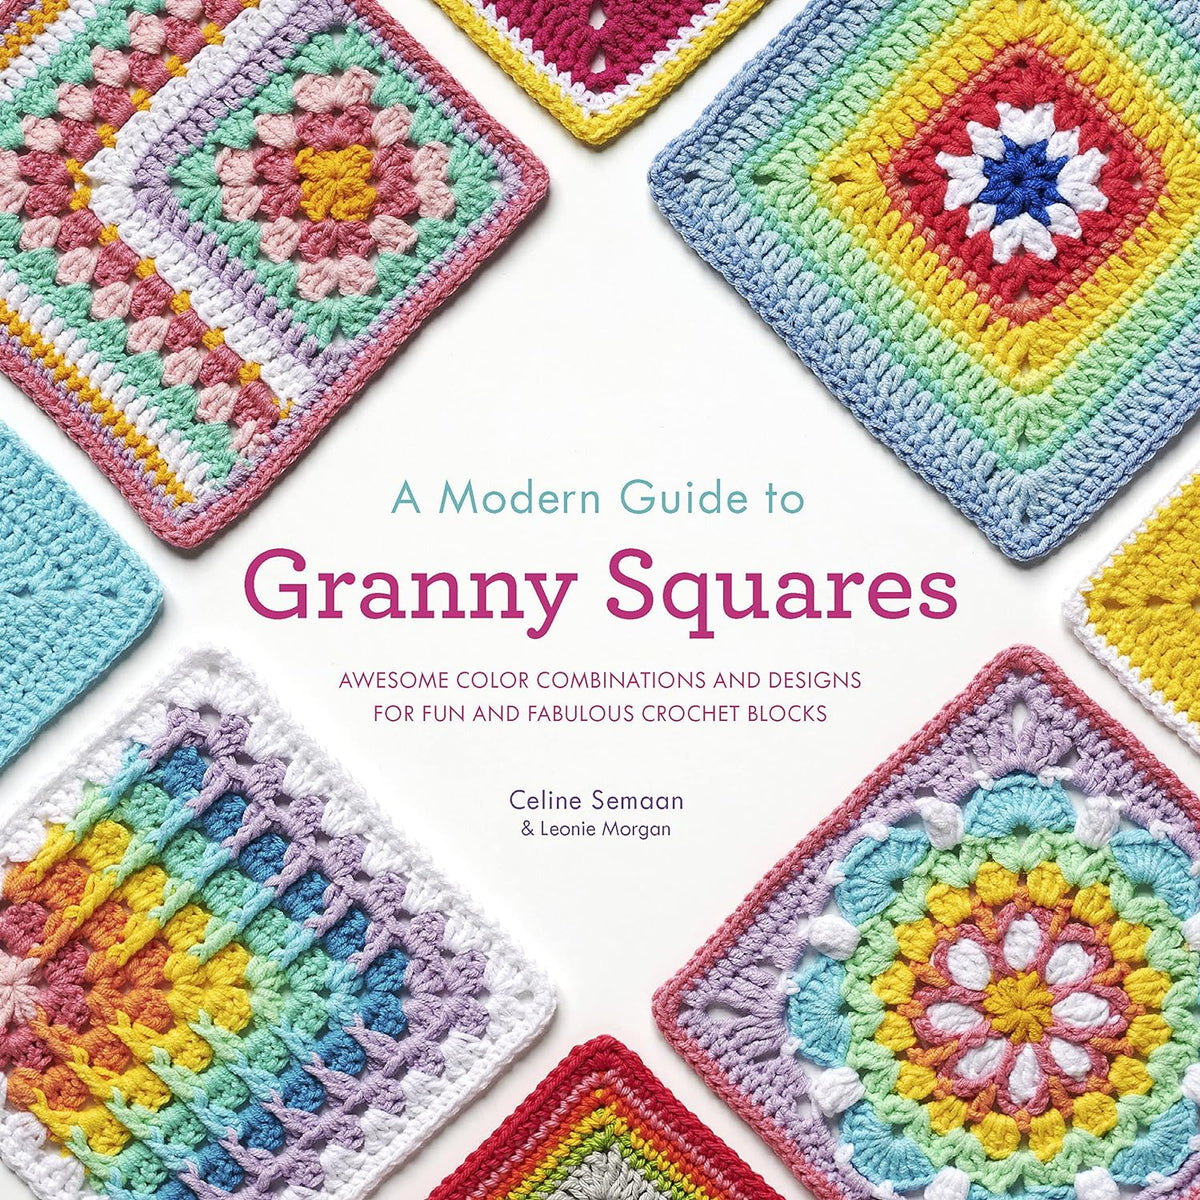 A Modern Guide to Granny Squares By Celine Semaan & Leonie Morgan